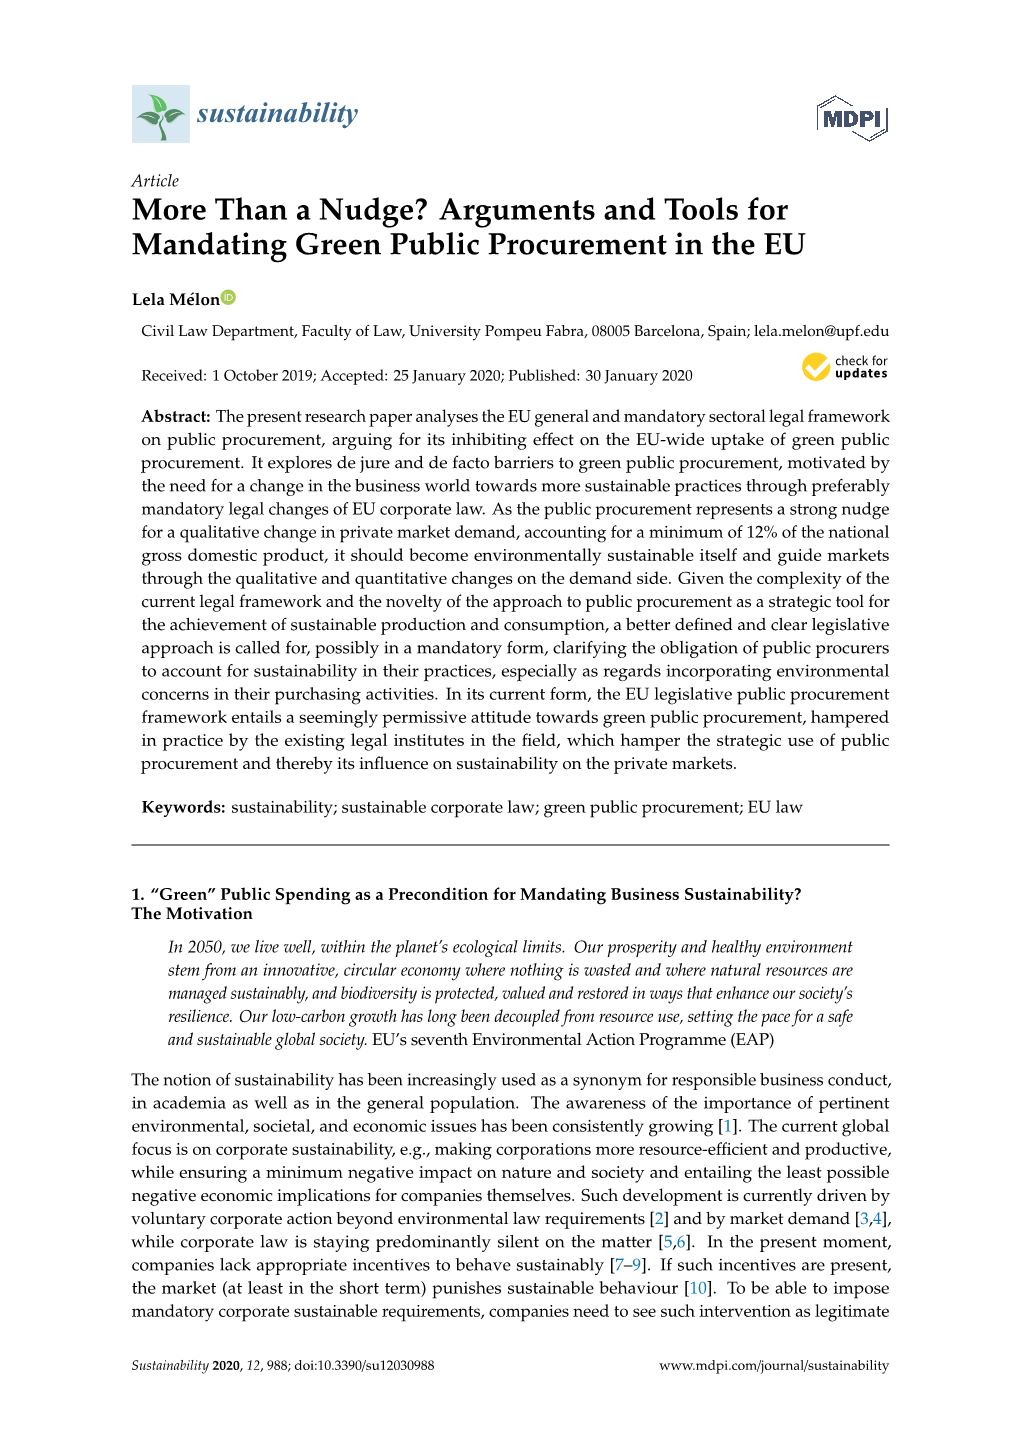 Arguments and Tools for Mandating Green Public Procurement in the EU